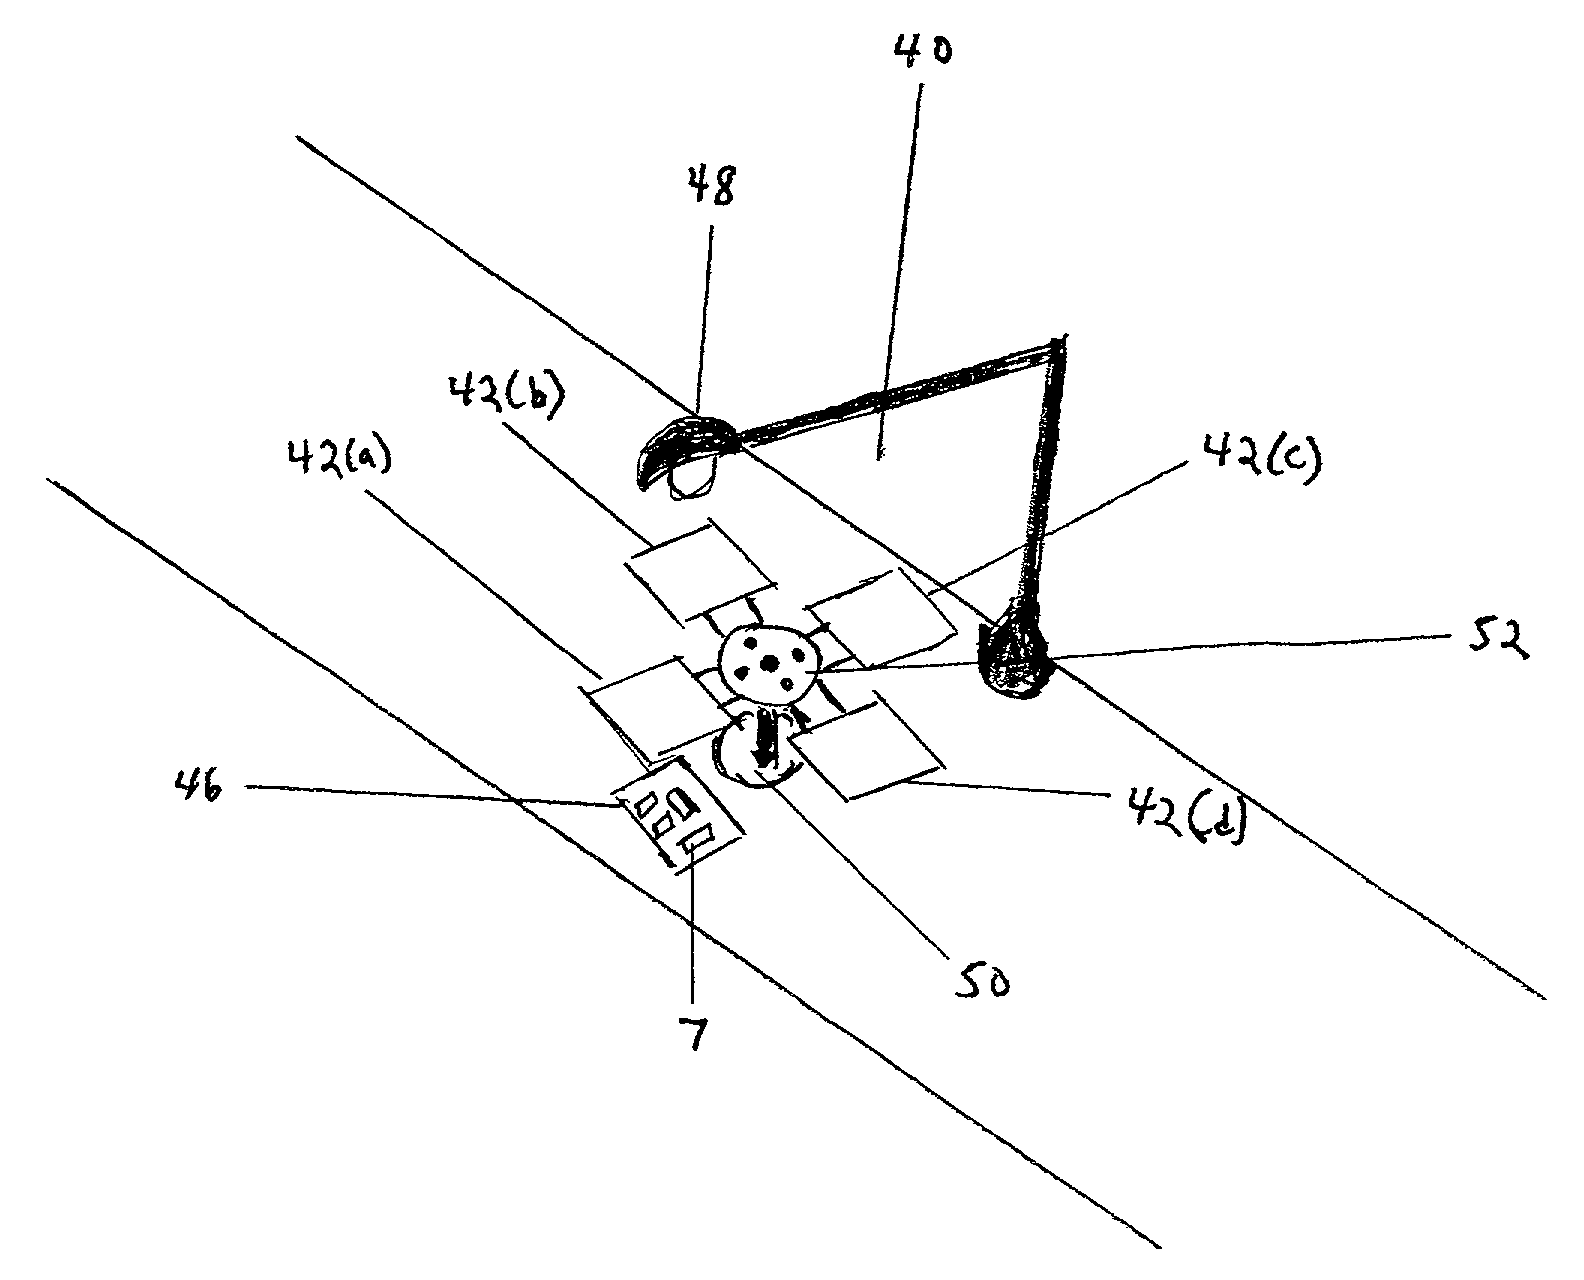 Method and apparatus for utilizing representational images in commercial and other activities